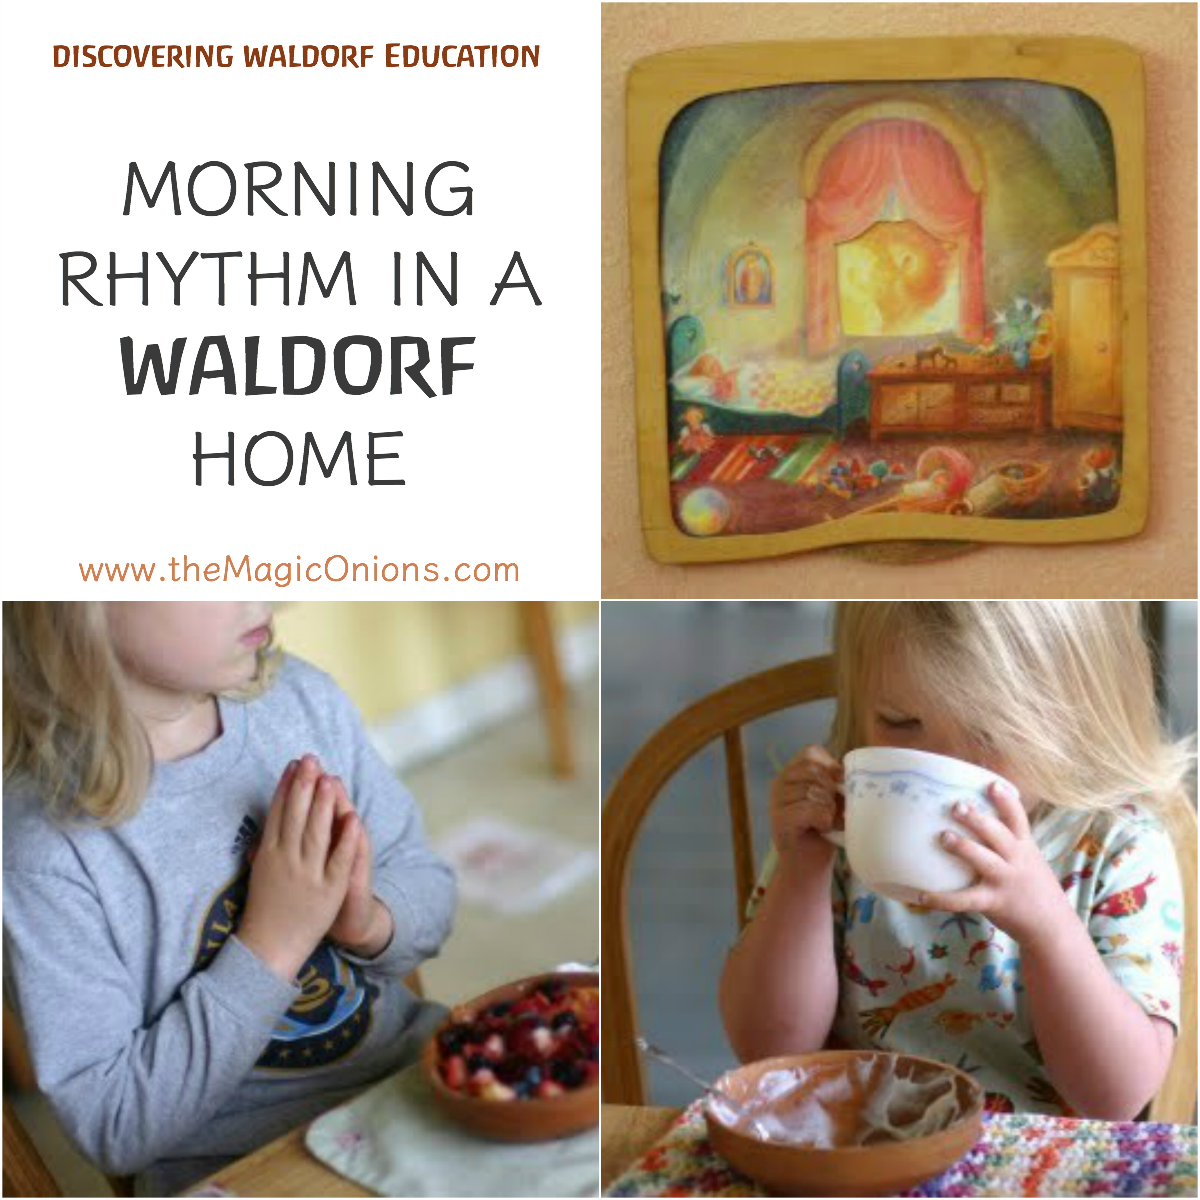 The Morning RHYTHM in a WALDORF Home with The Magic Onions